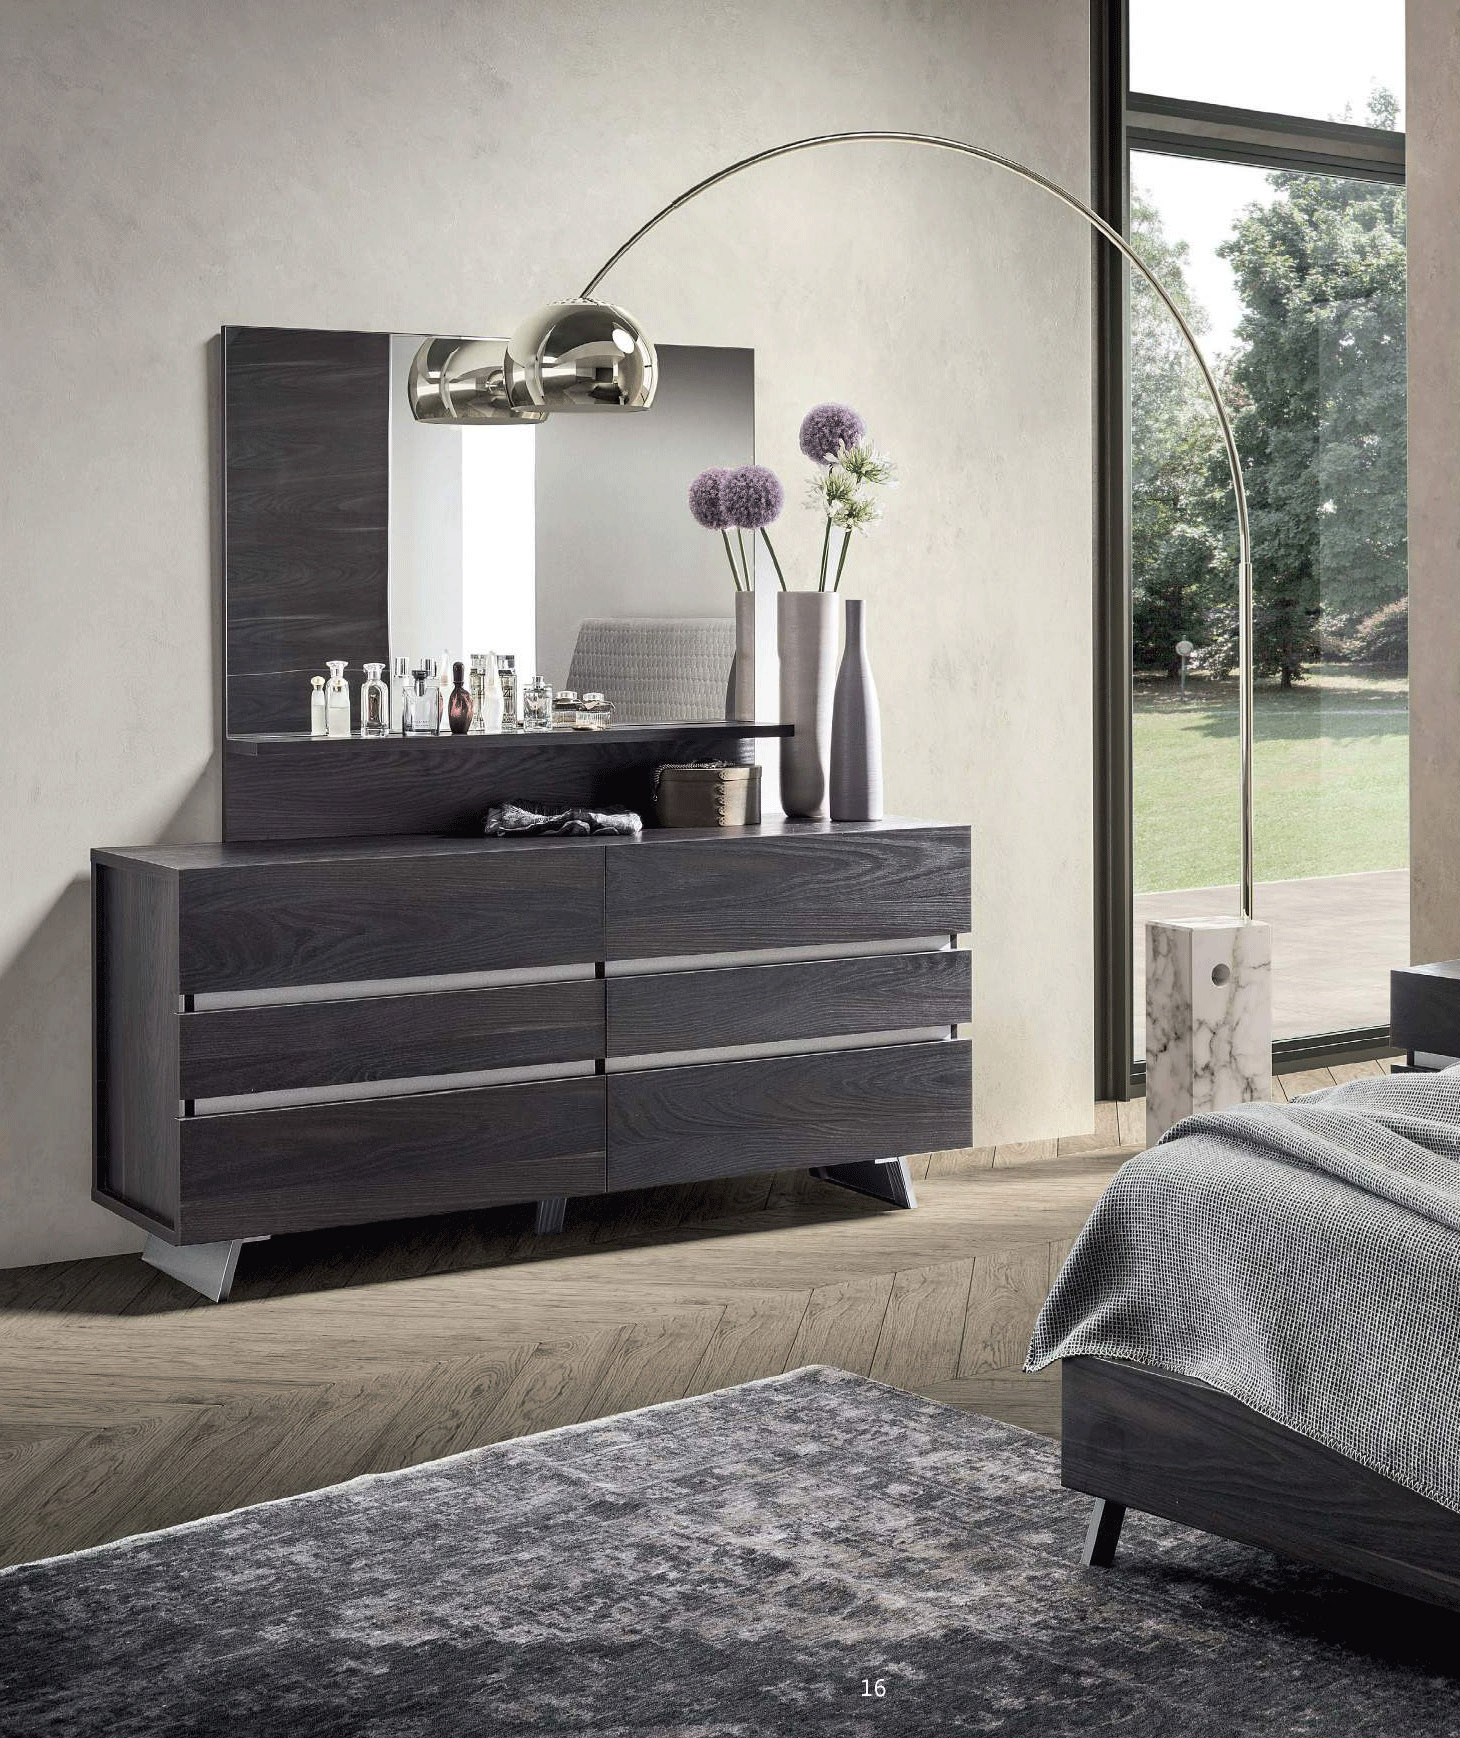 Made in Italy Wood Contemporary Bedroom Design